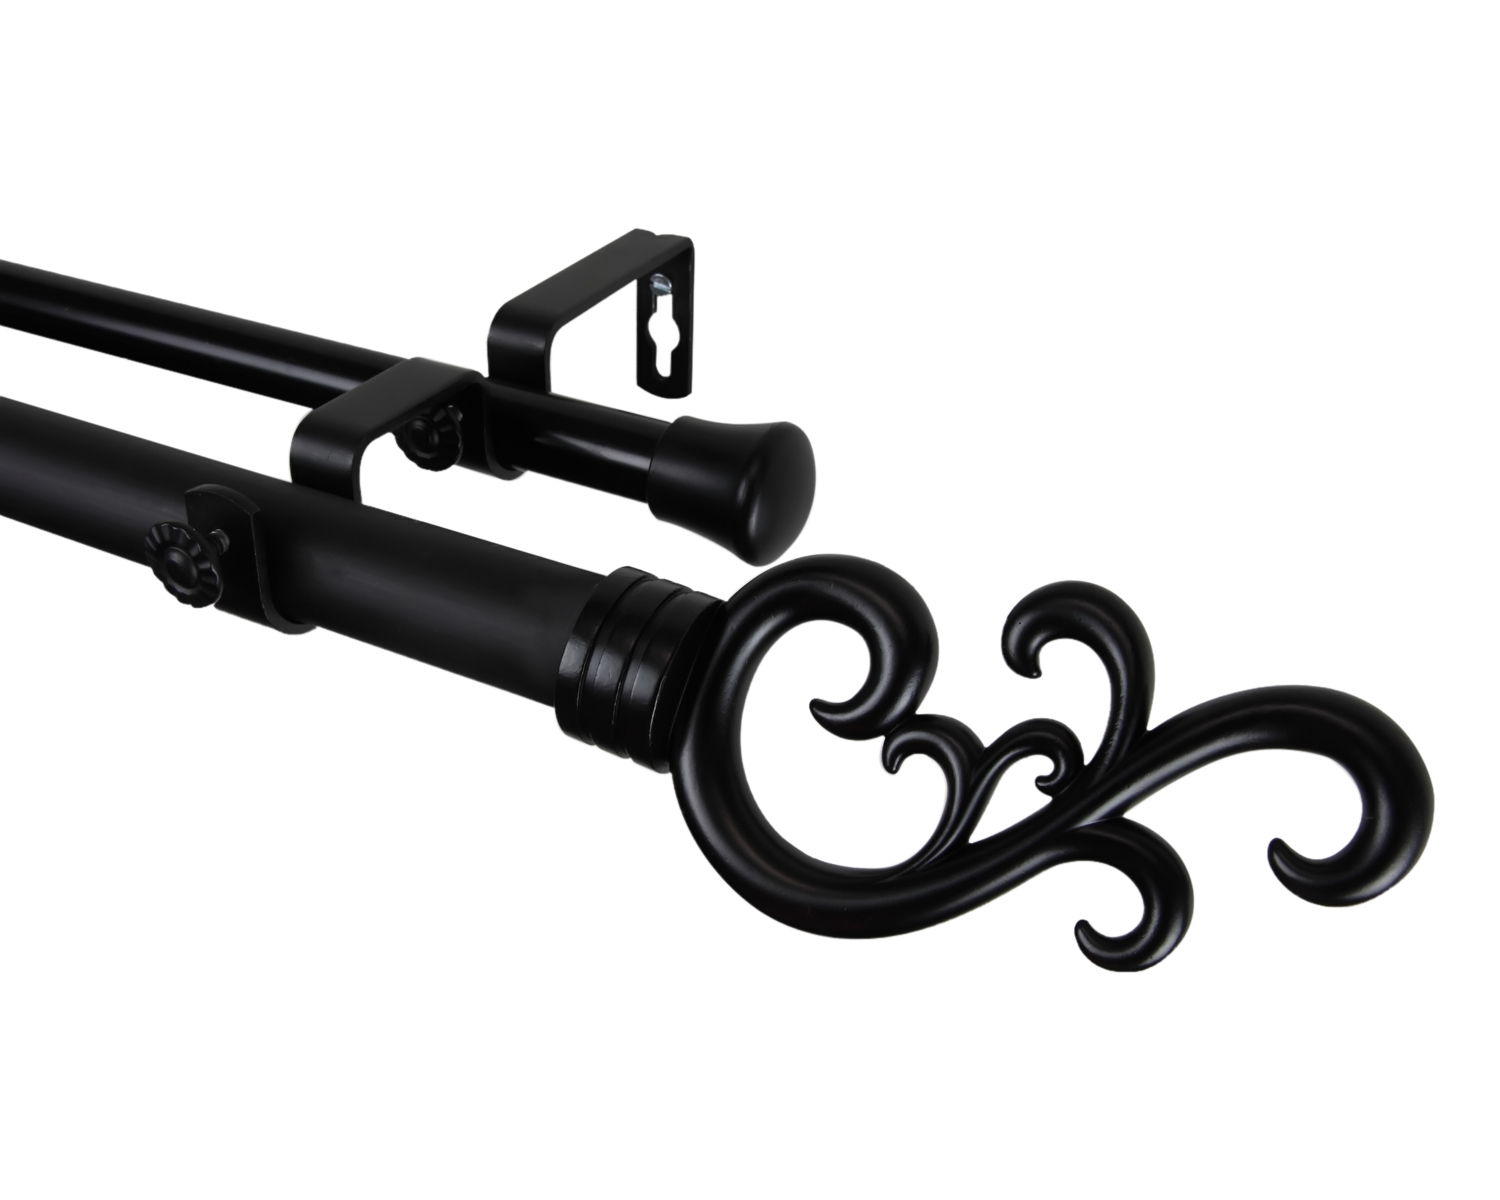 Primary image for Rod Desyne Home Window Madeline Double Curtain Rod 120-170 inch - Black